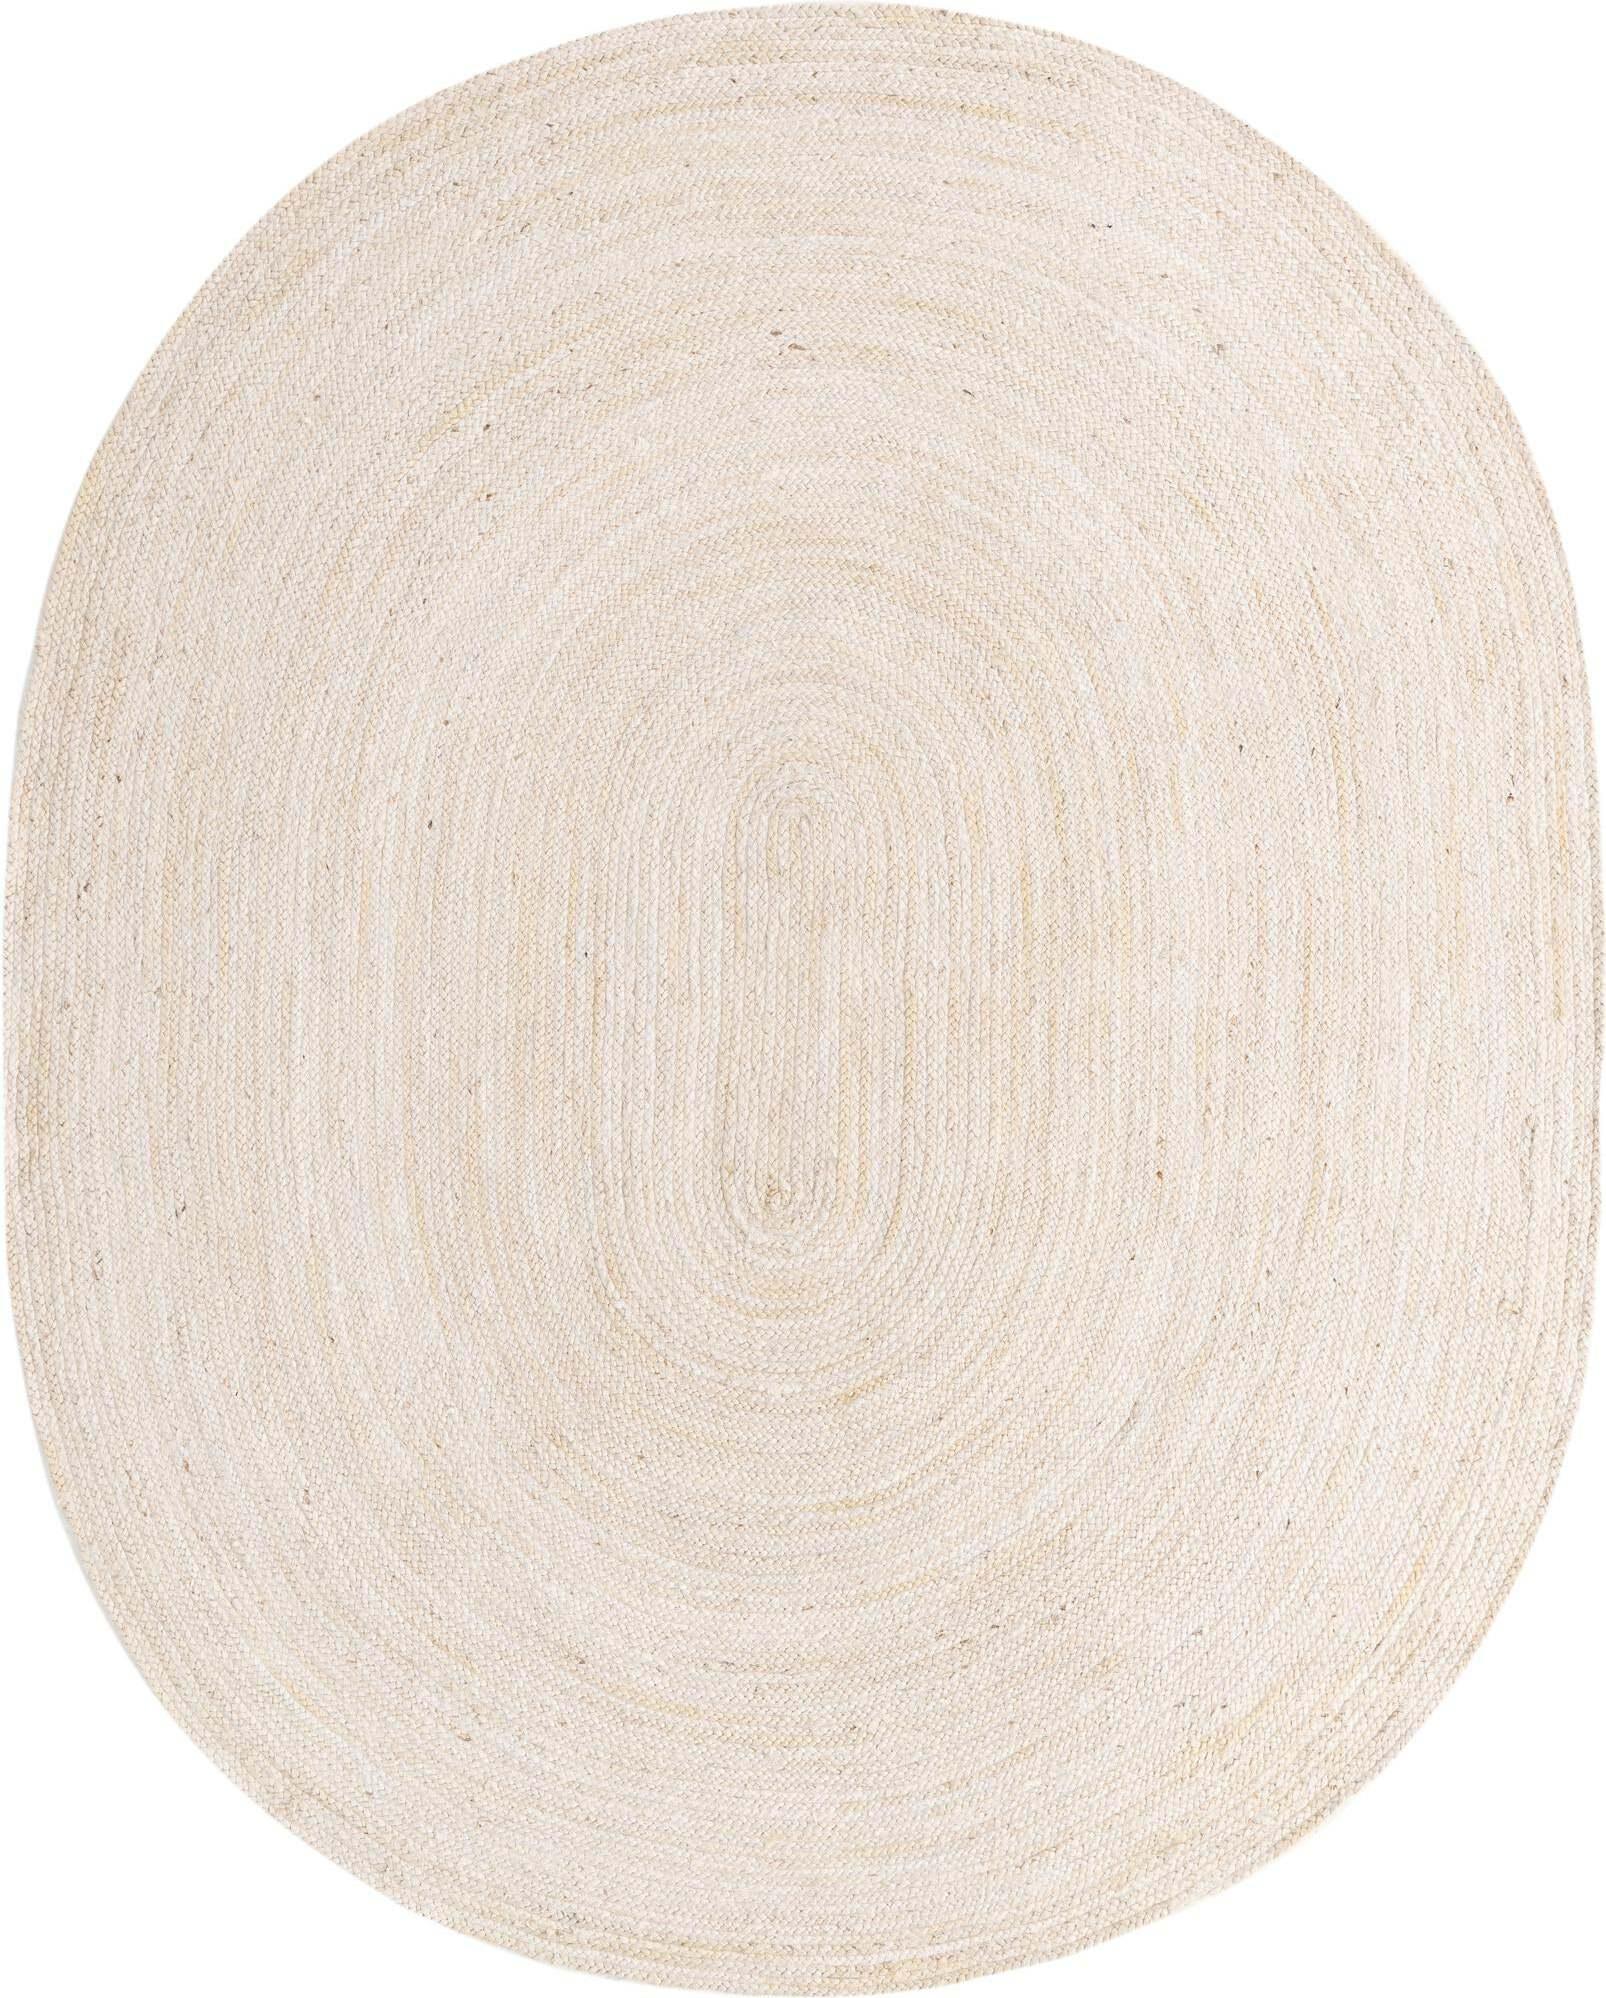 Unique Loom Indoor Rugs - Braided Jute Solid Oval 8x10 Oval Rug Beige & Natural